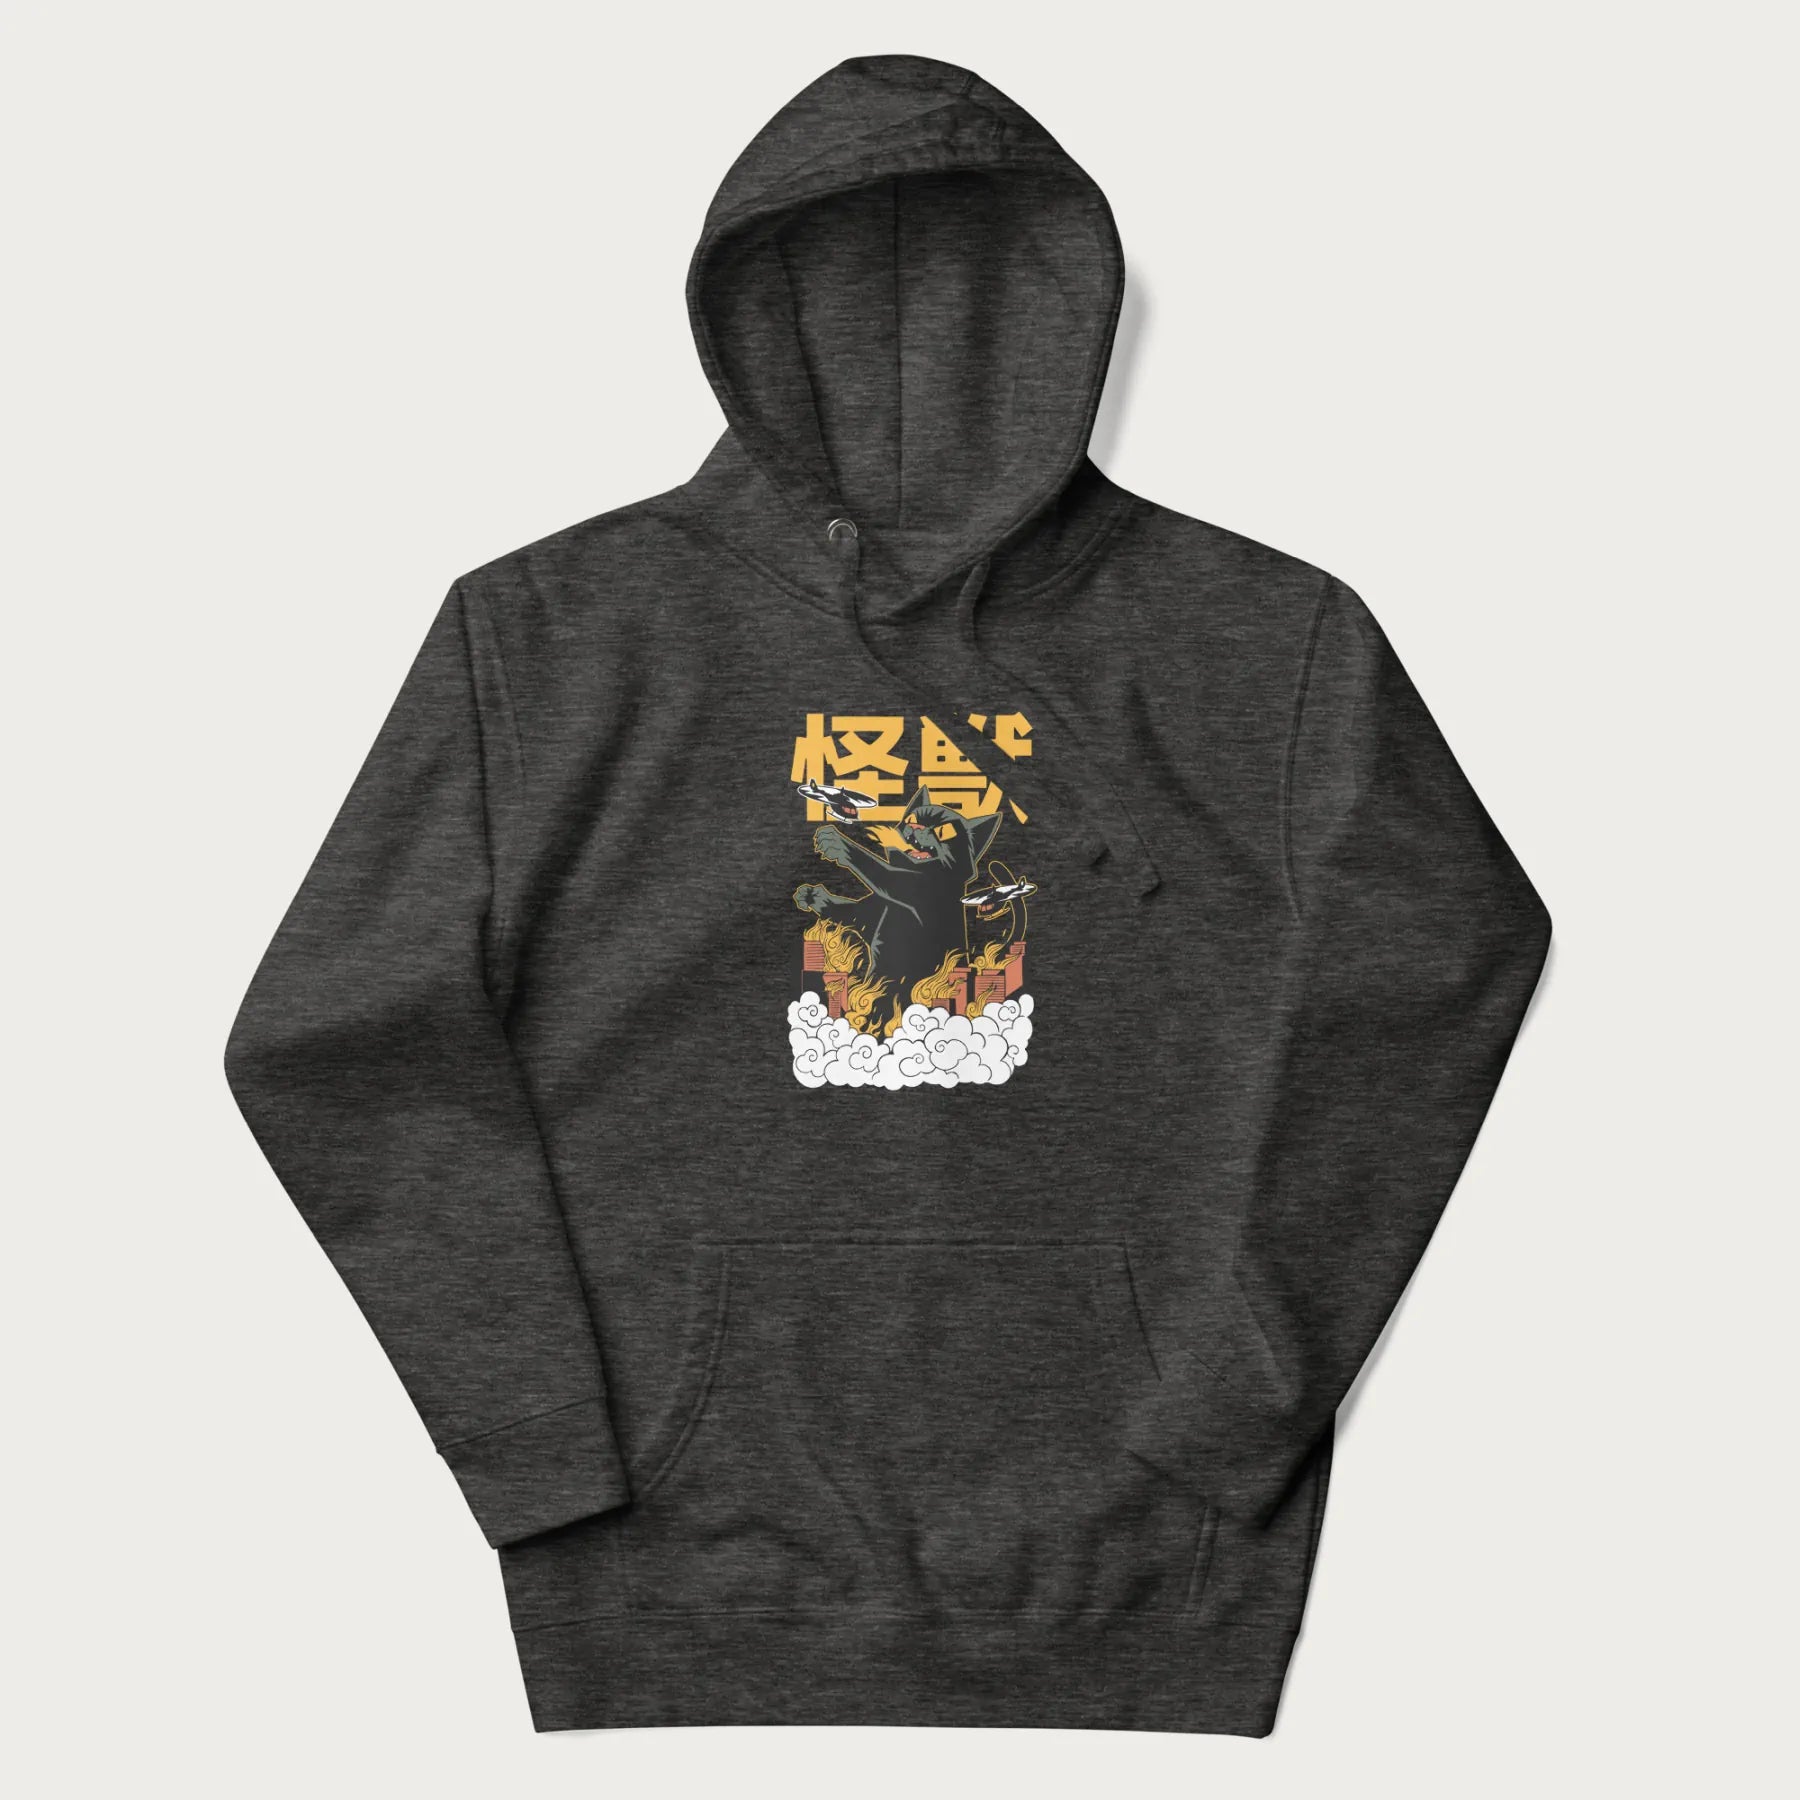 Dark grey hoodie with graphic of a 'Kaiju Cat' with helicopters and flames in a burning city.